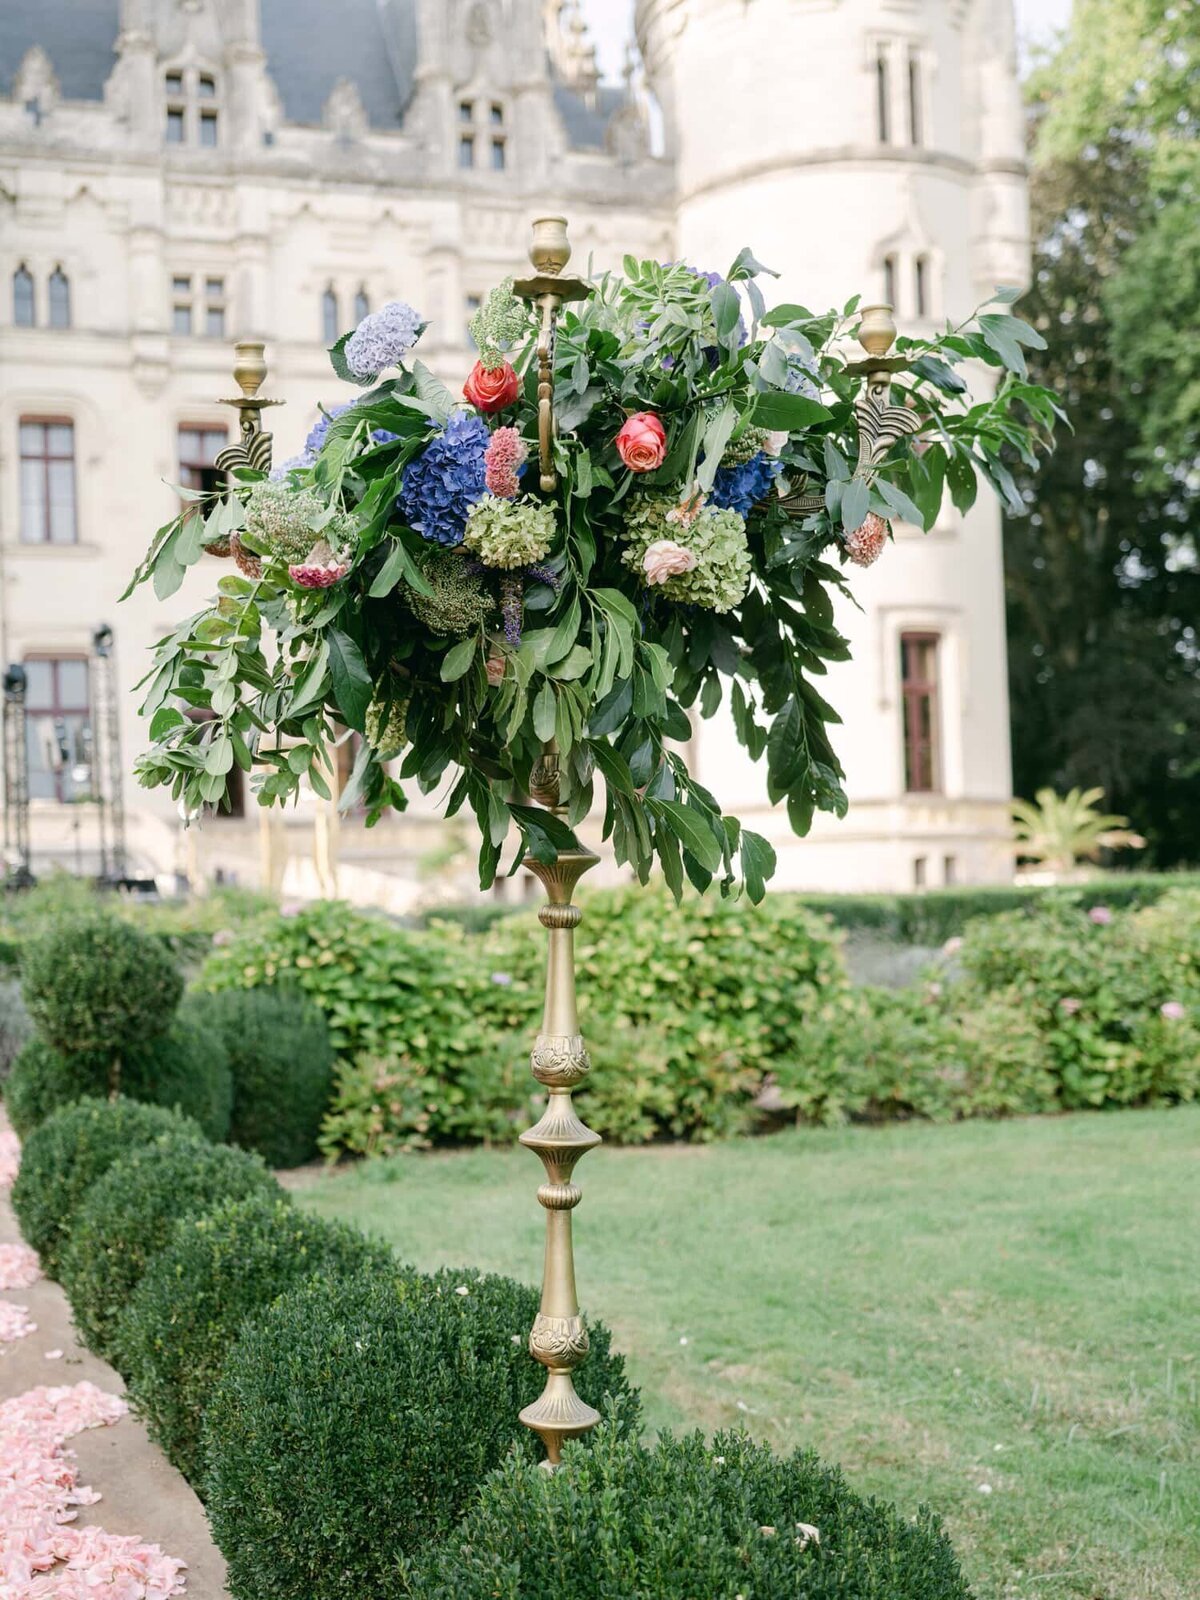 Destination wedding in France - Chateau Challain - Serenity Photography - 40